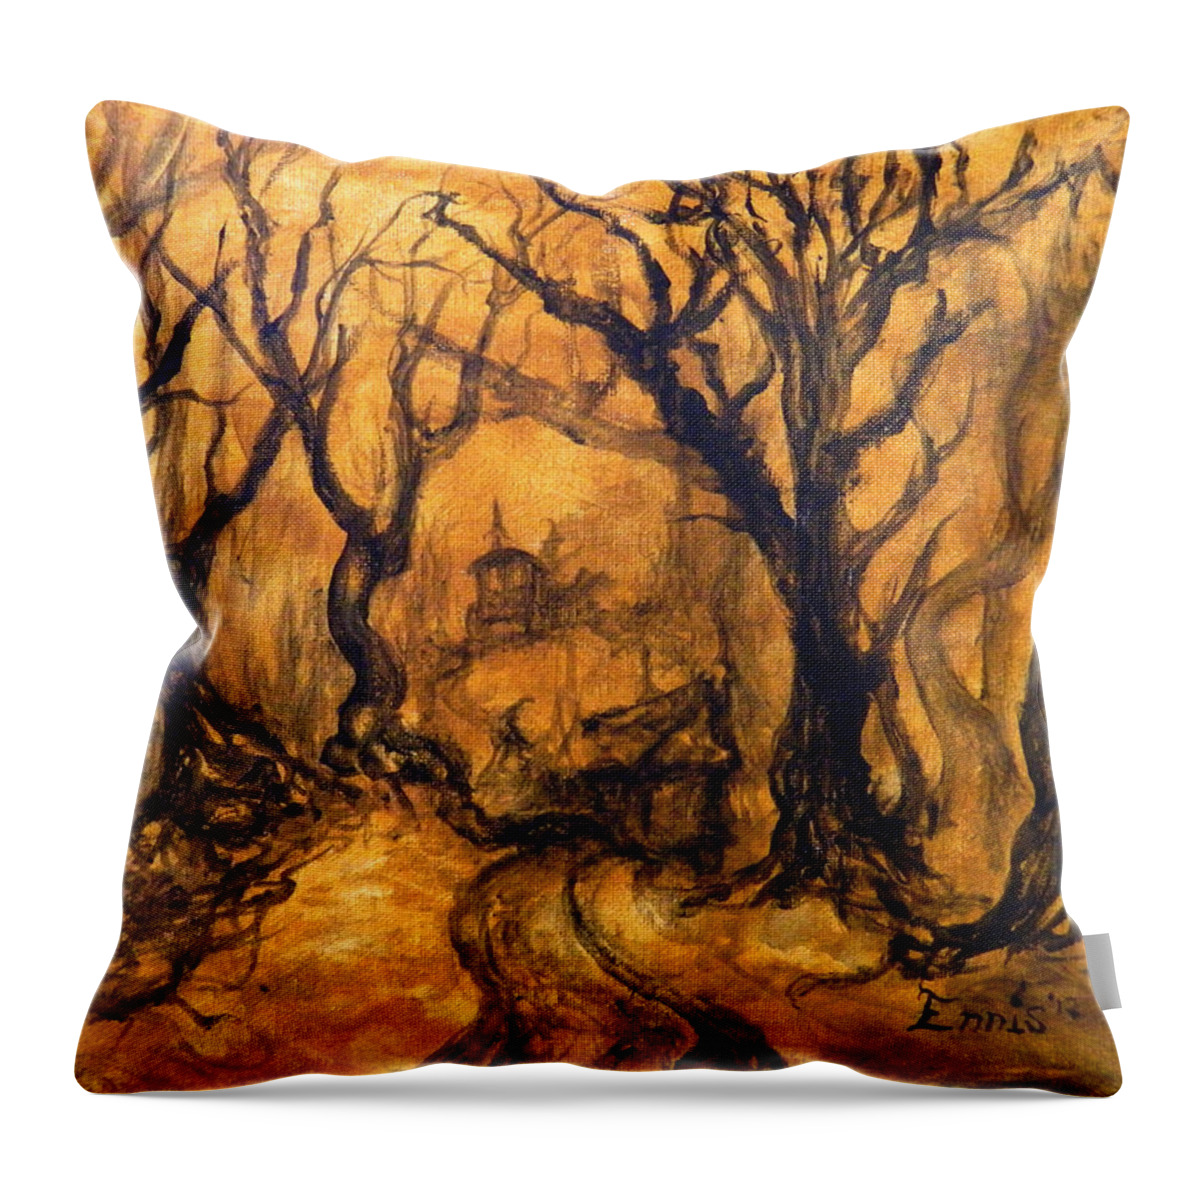 Ennis Throw Pillow featuring the painting Toad Hollow by Christophe Ennis